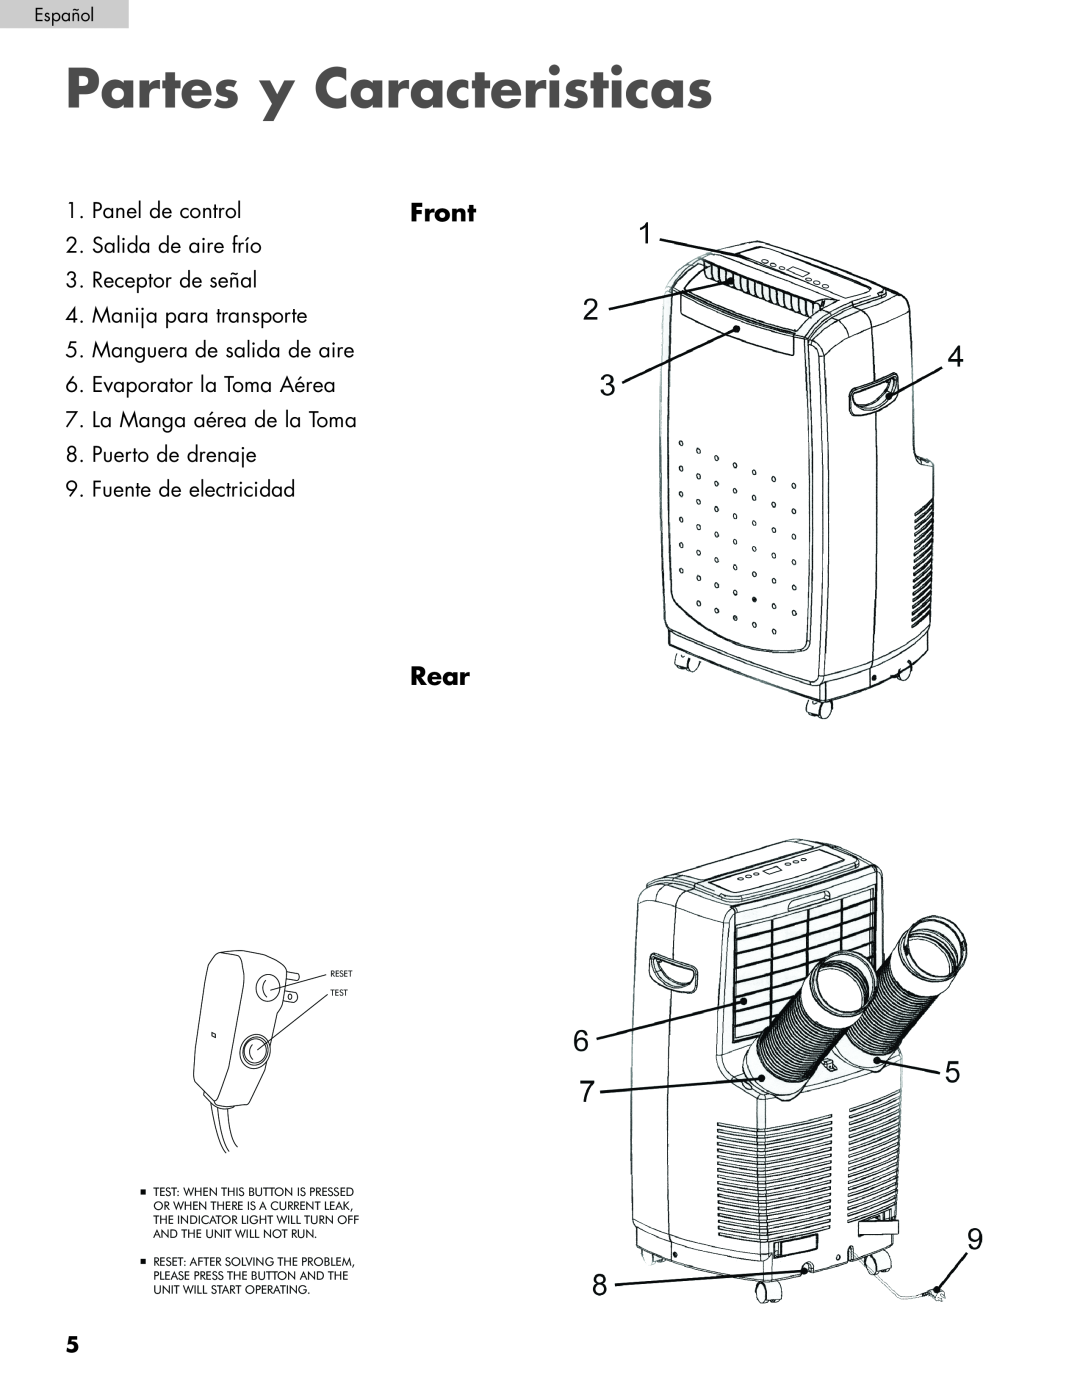 Haier HPRD12XH7, HPRD12XC7 user manual Partes y Caracteristicas, Front, Rear 